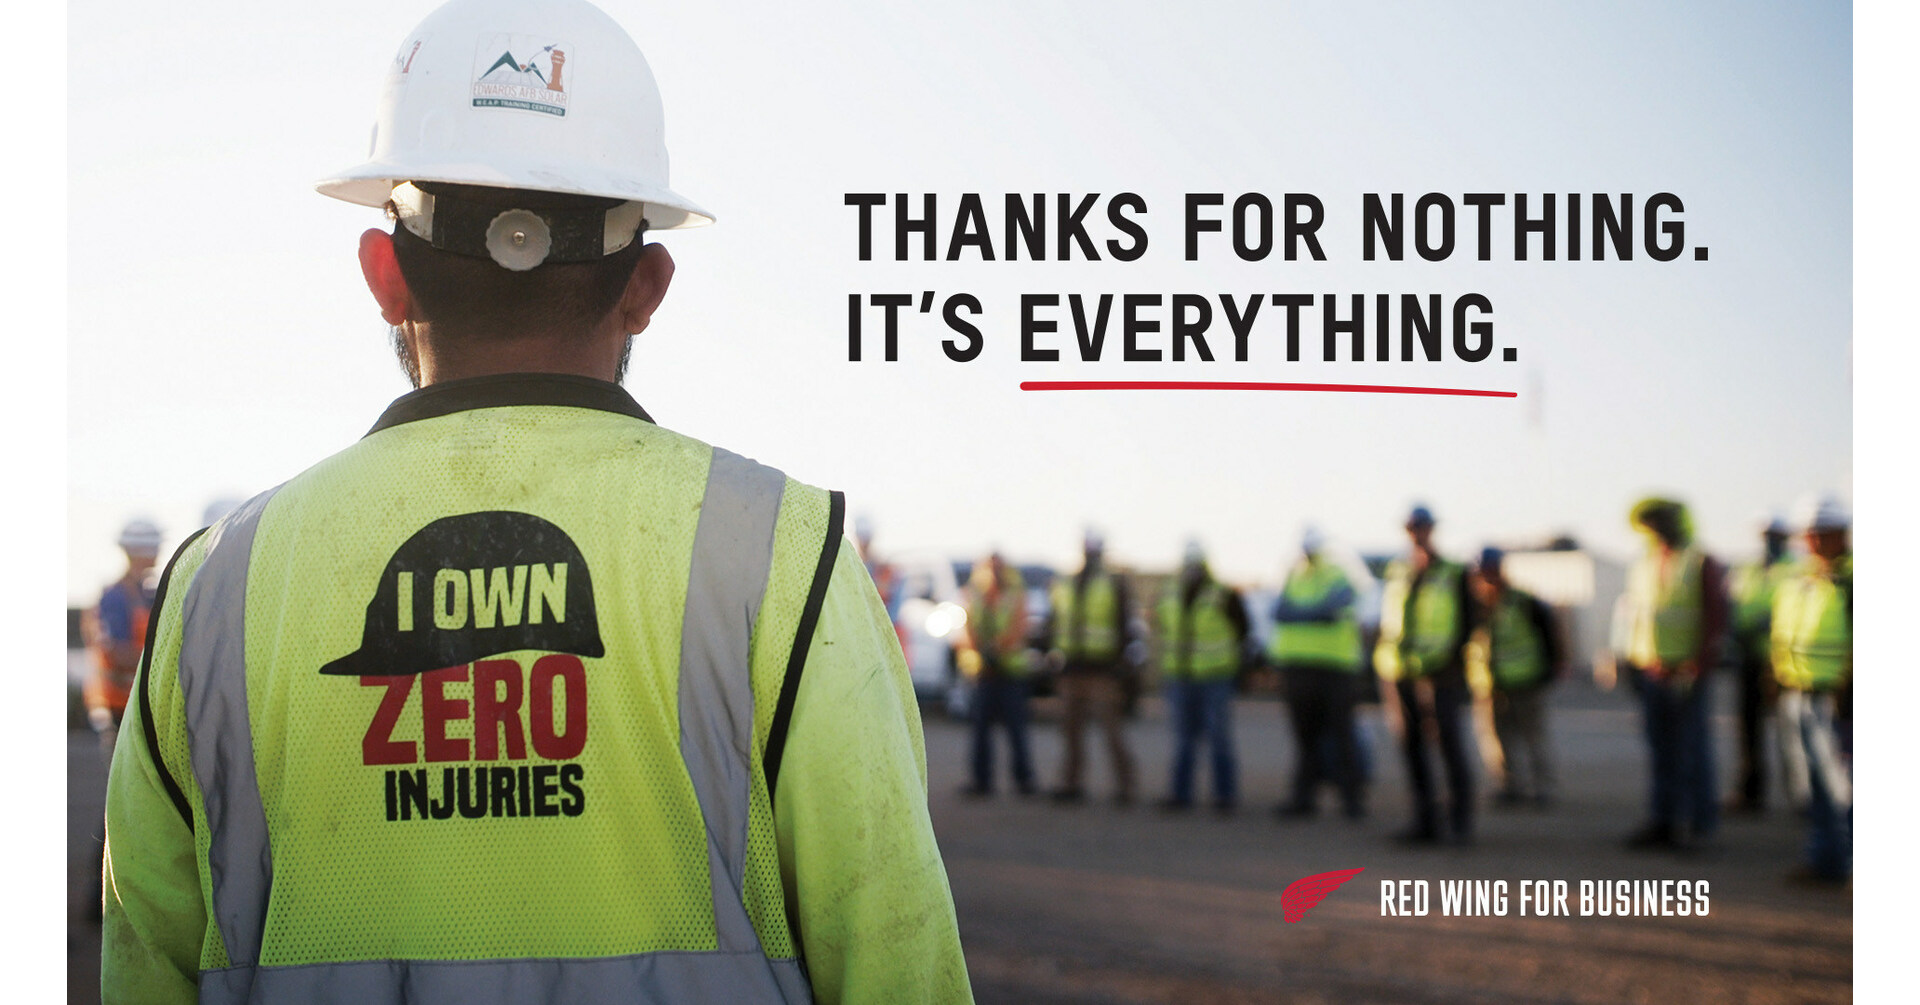 RED WING SHOE COMPANY RECOGNIZES SAFETY PROFESSIONALS FOR KEEPING JOB BY SAYING FOR